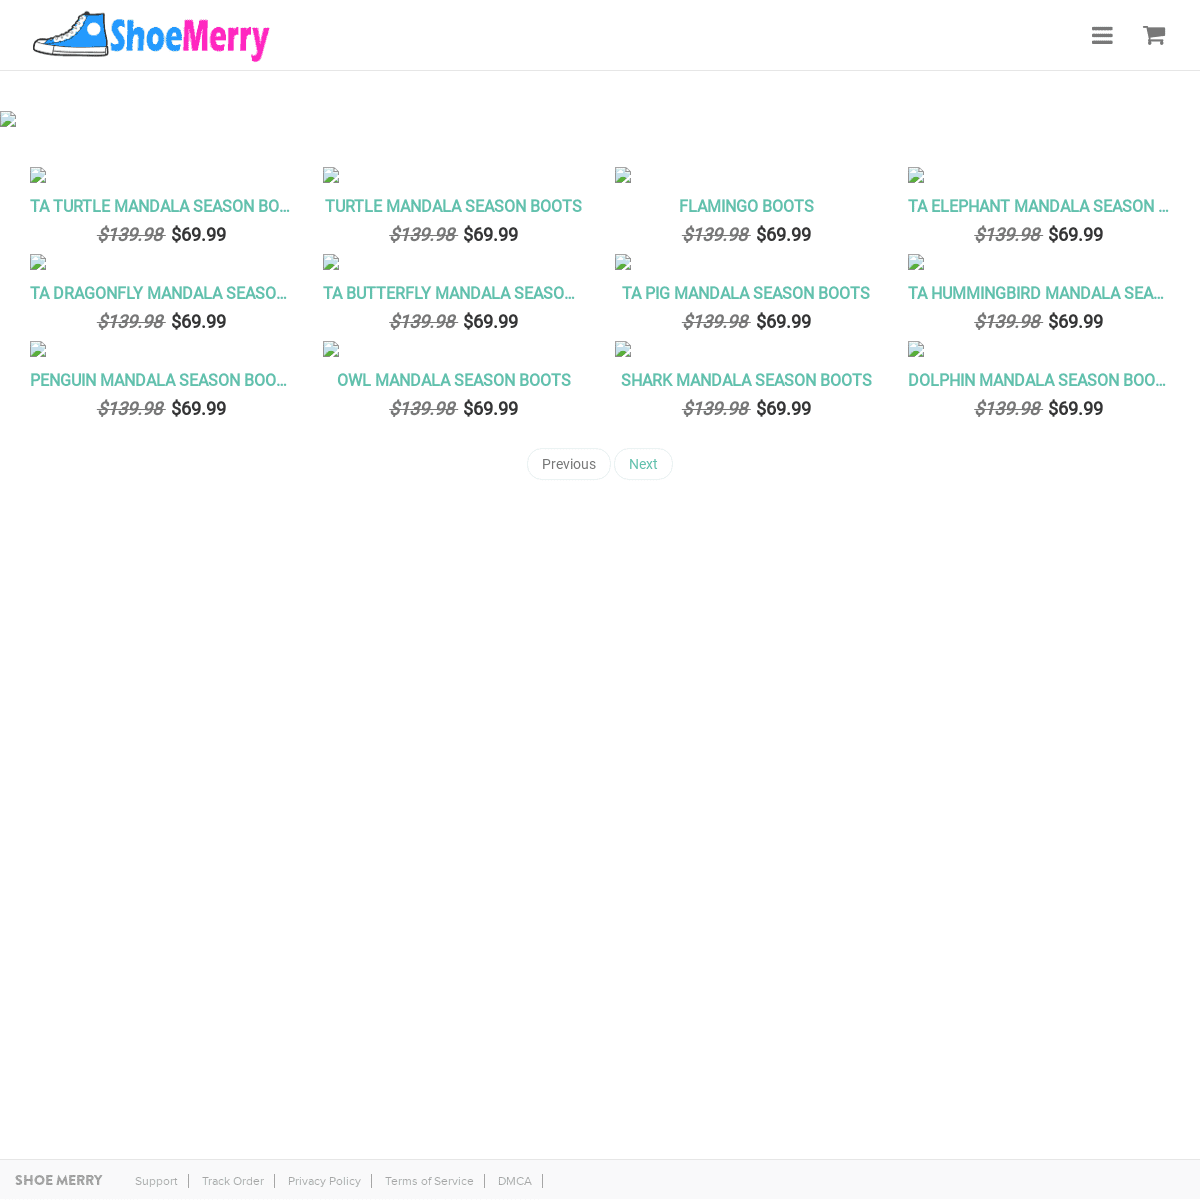 A complete backup of shoemerry.com